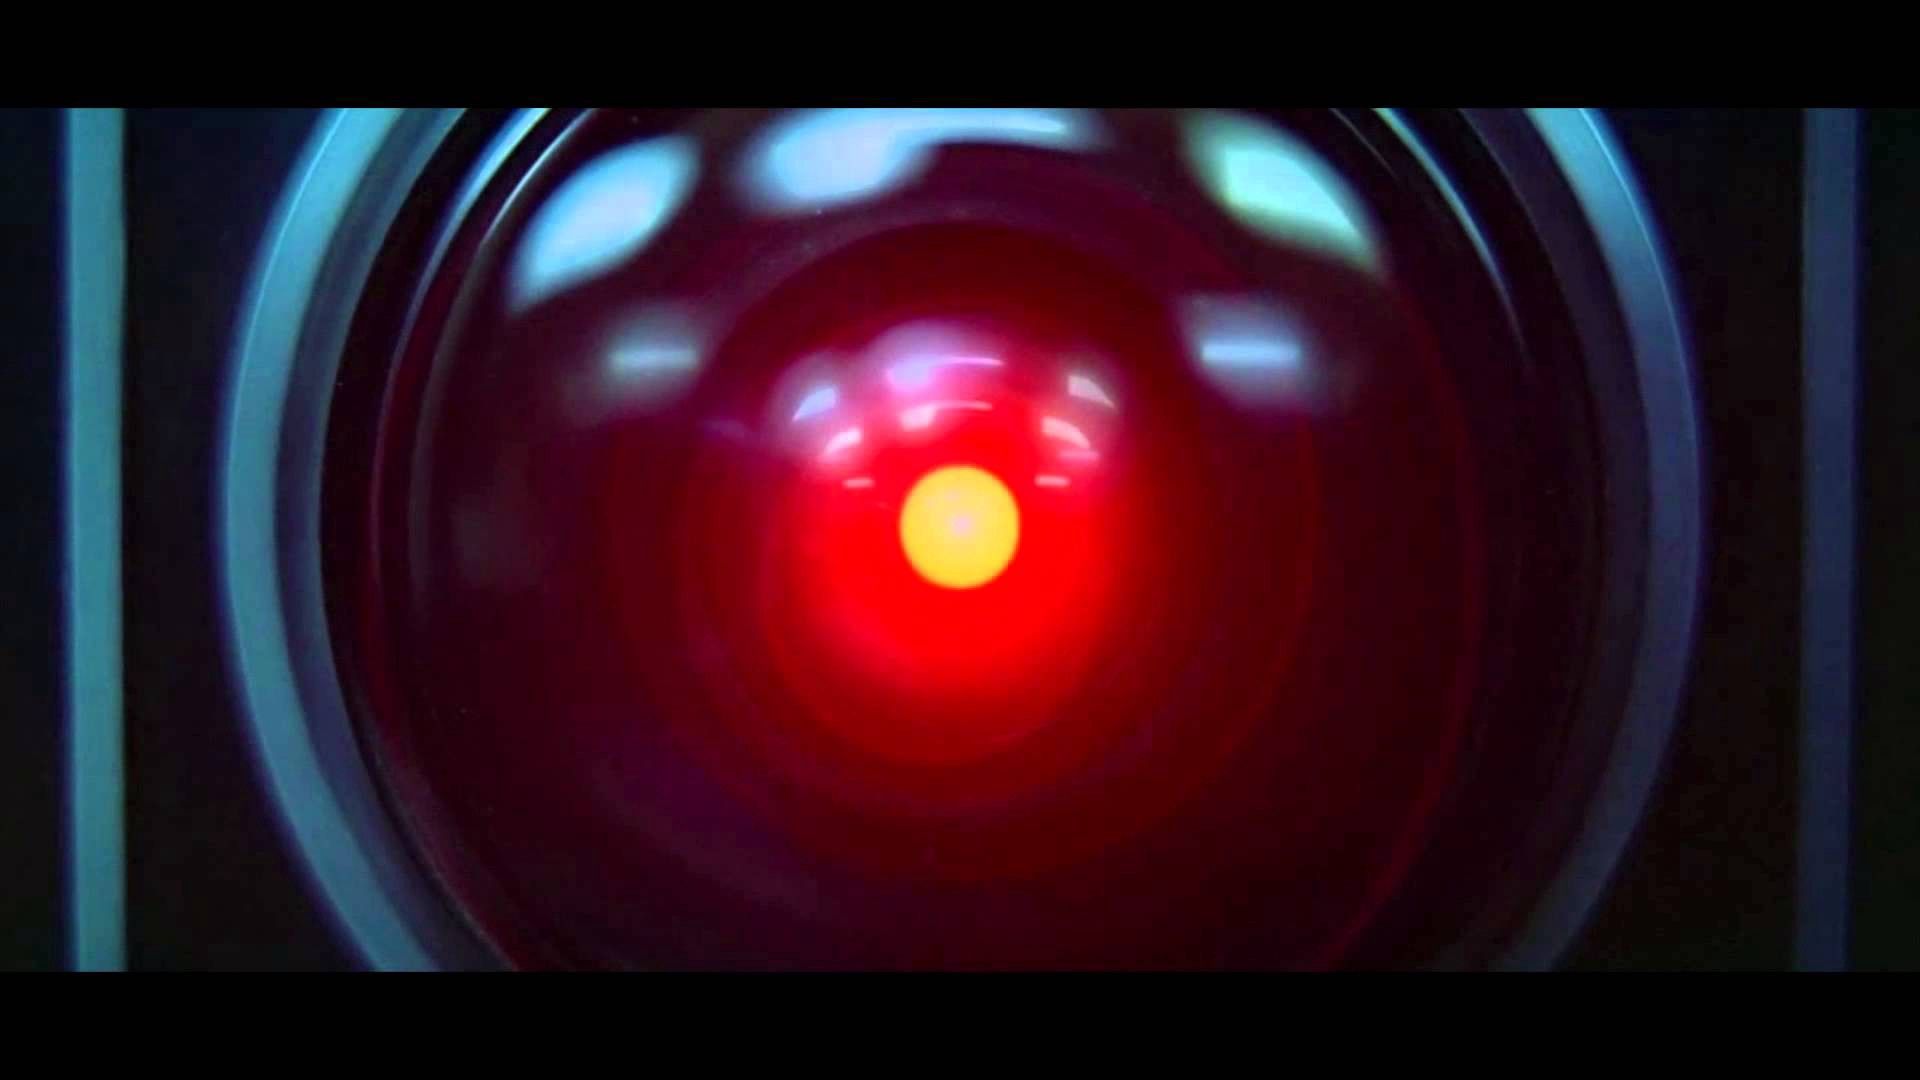 Years After 2001: A Space Odyssey, Can we Build a HAL 9000